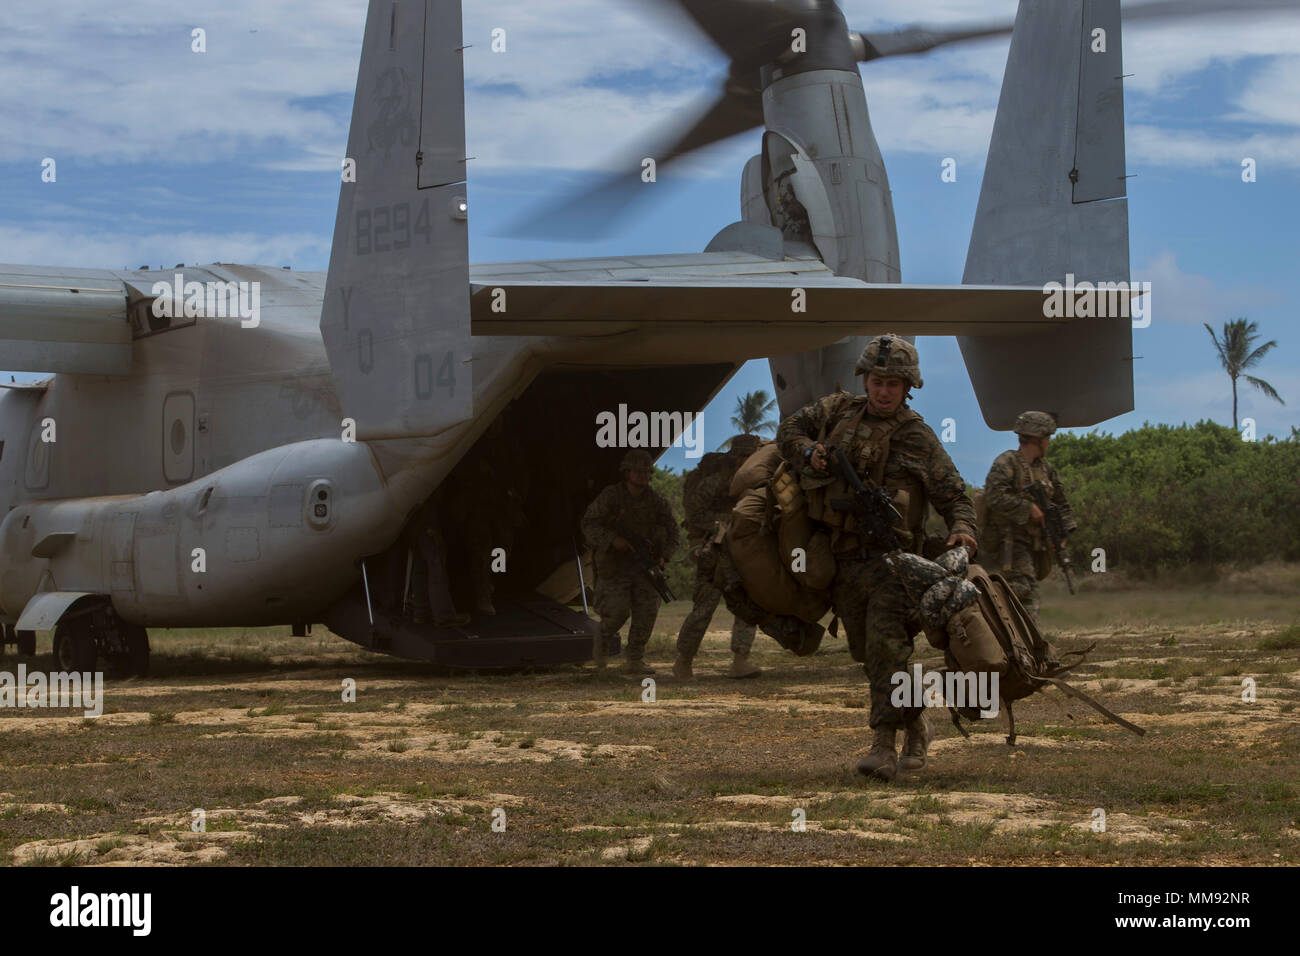 U.S. Marines with 3rd Battalion, 3rd Marine Regiment, unload gear from a MV-22B Ospery with Marine Medium Tiltrotor Squadron 268, 1st Marine Aircraft Wing, after returning to Marine Corps Air Station Kaneohe Bay during the conclusion of Exercise Bougainville II, Sept. 15, 2017. Bougainville II was conducted in the Pohakuloa Training Area, Hawaii, to train Marines in the Regiment on how to operate as a ground combat element of the Marine Air-Ground Task Force. (U.S. Marine Corps Photo by: Sgt. Alex Kouns) Stock Photo